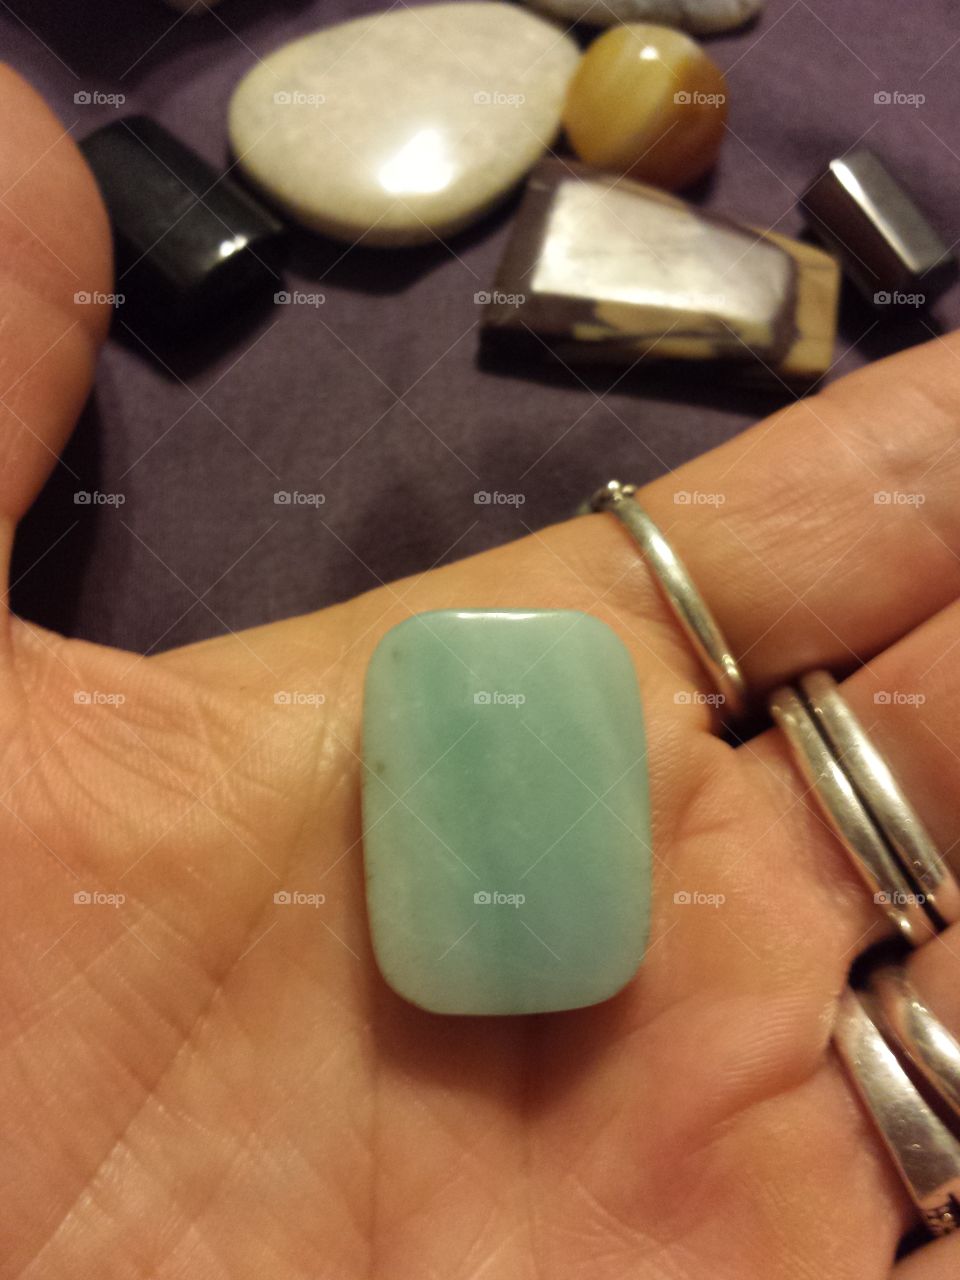 Turquoise stone in hand